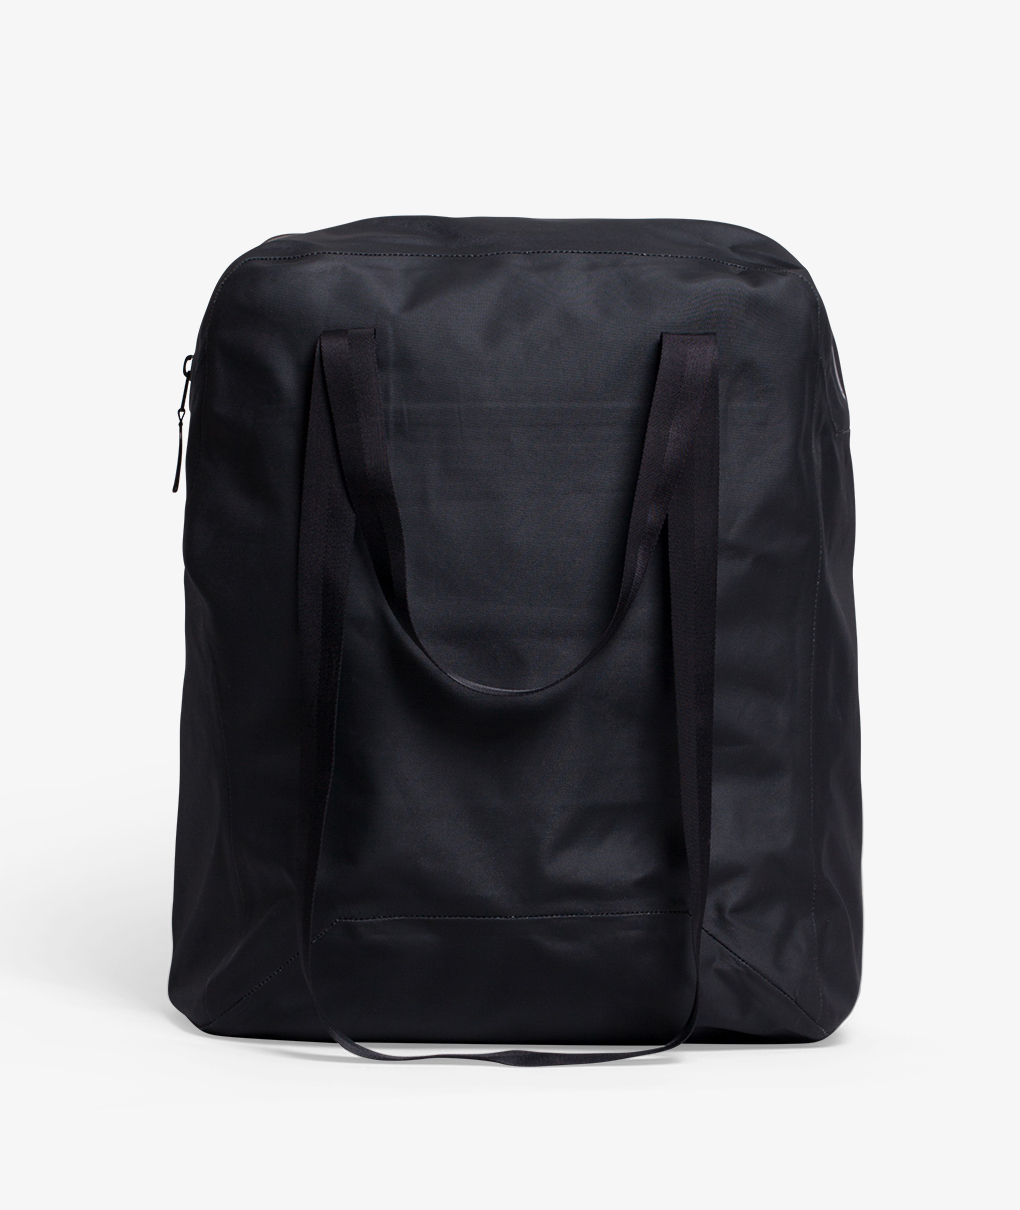 Norse Store | Shipping Worldwide - Seque Tote by Veilance